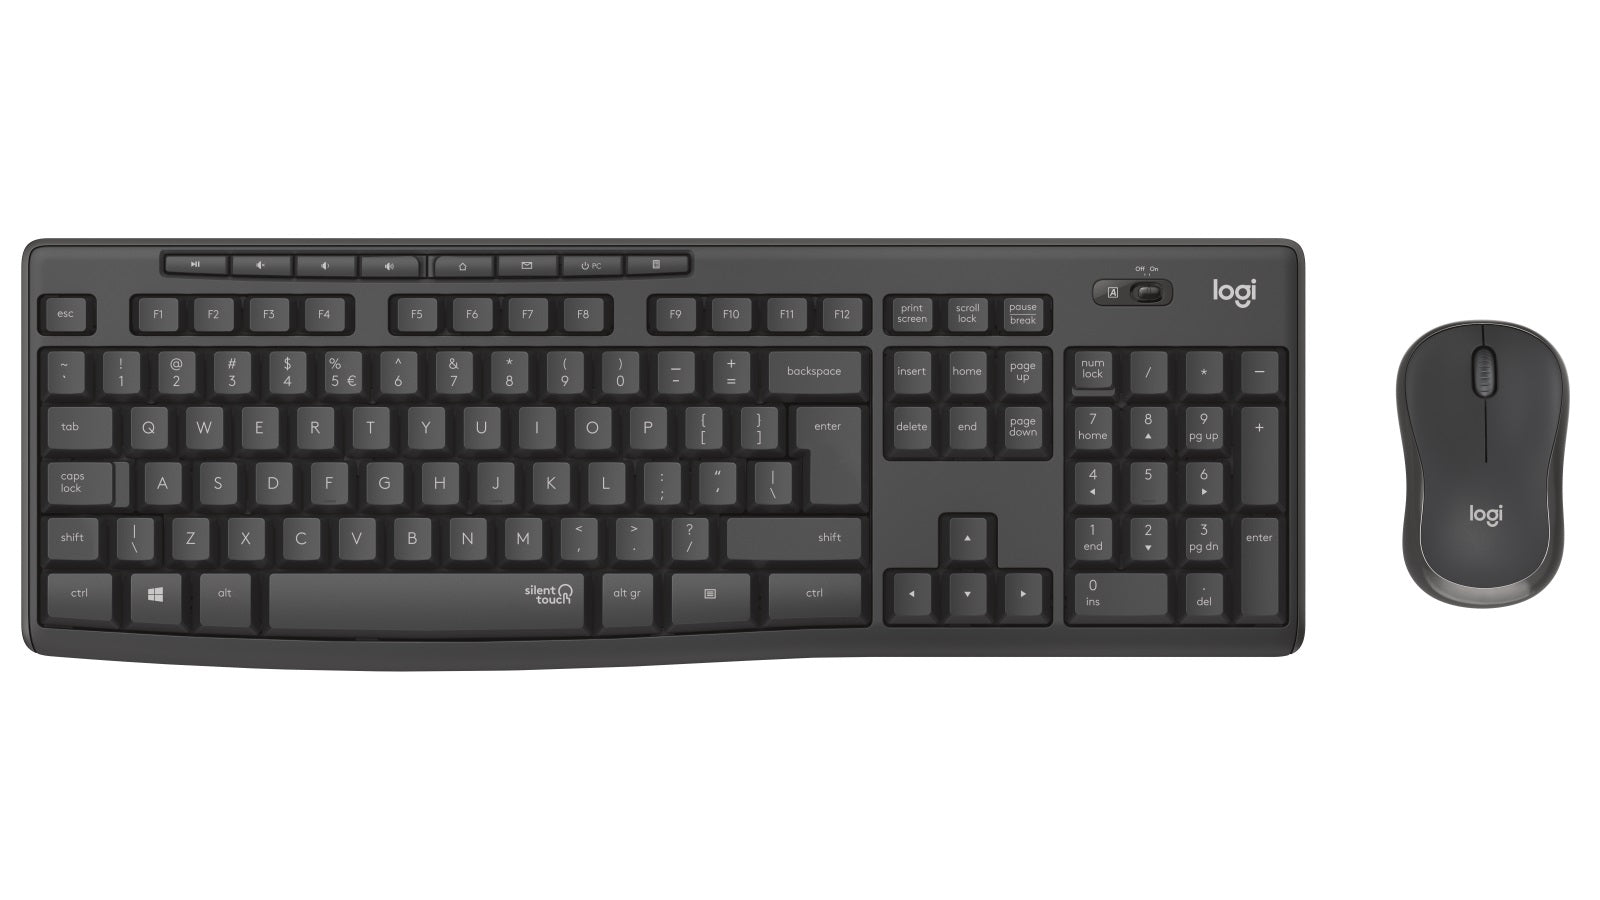 Logitech MK295 WIRELESS SILENT KEYBOARD AND MOUSE COMBO, 2.4GHZ USB RECEIVER - 1YR WTY